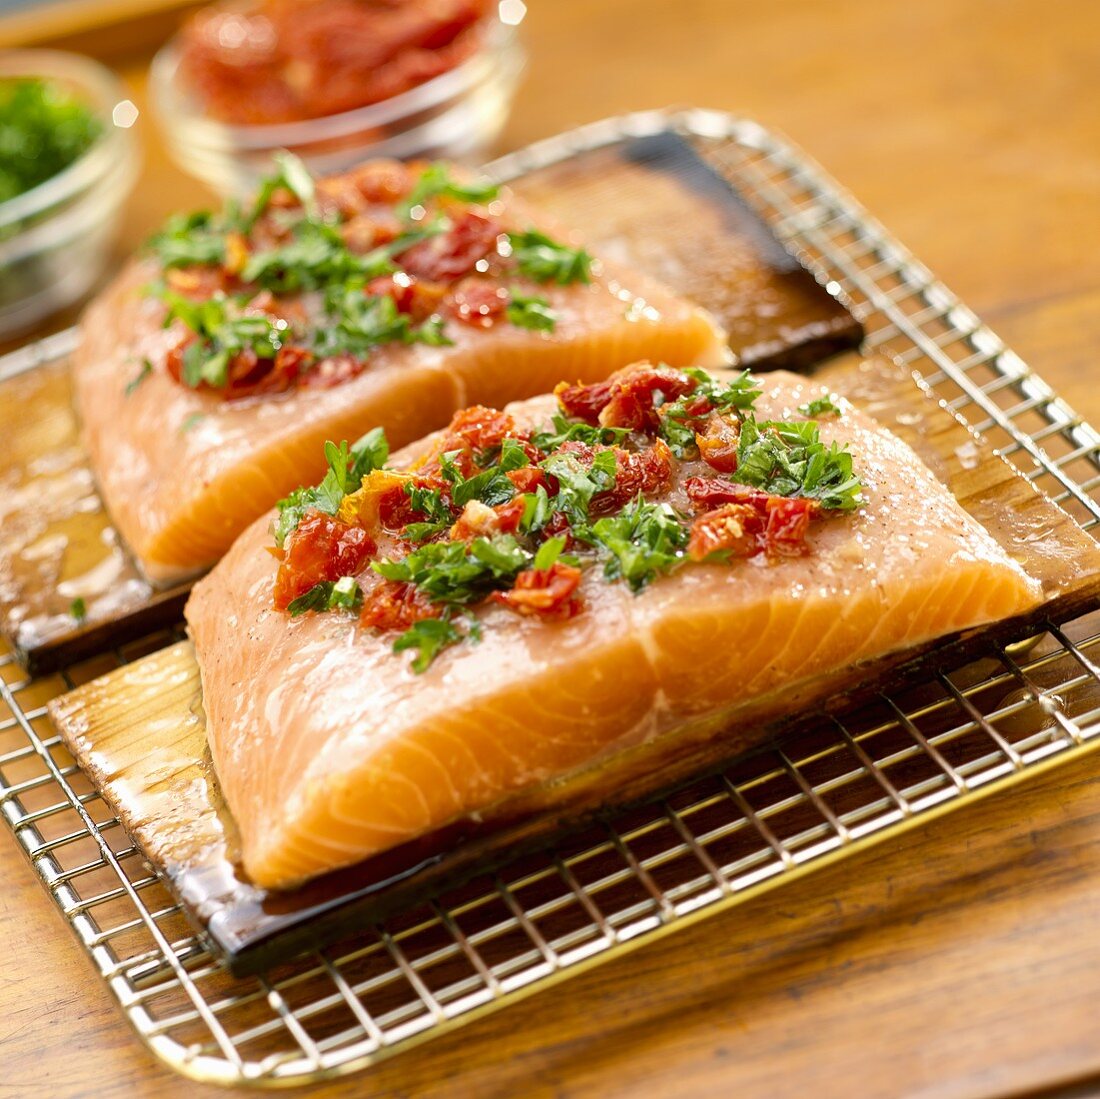 Two Cedar Planked Salmon Fillets with Sundried Tomatoes and Parsley